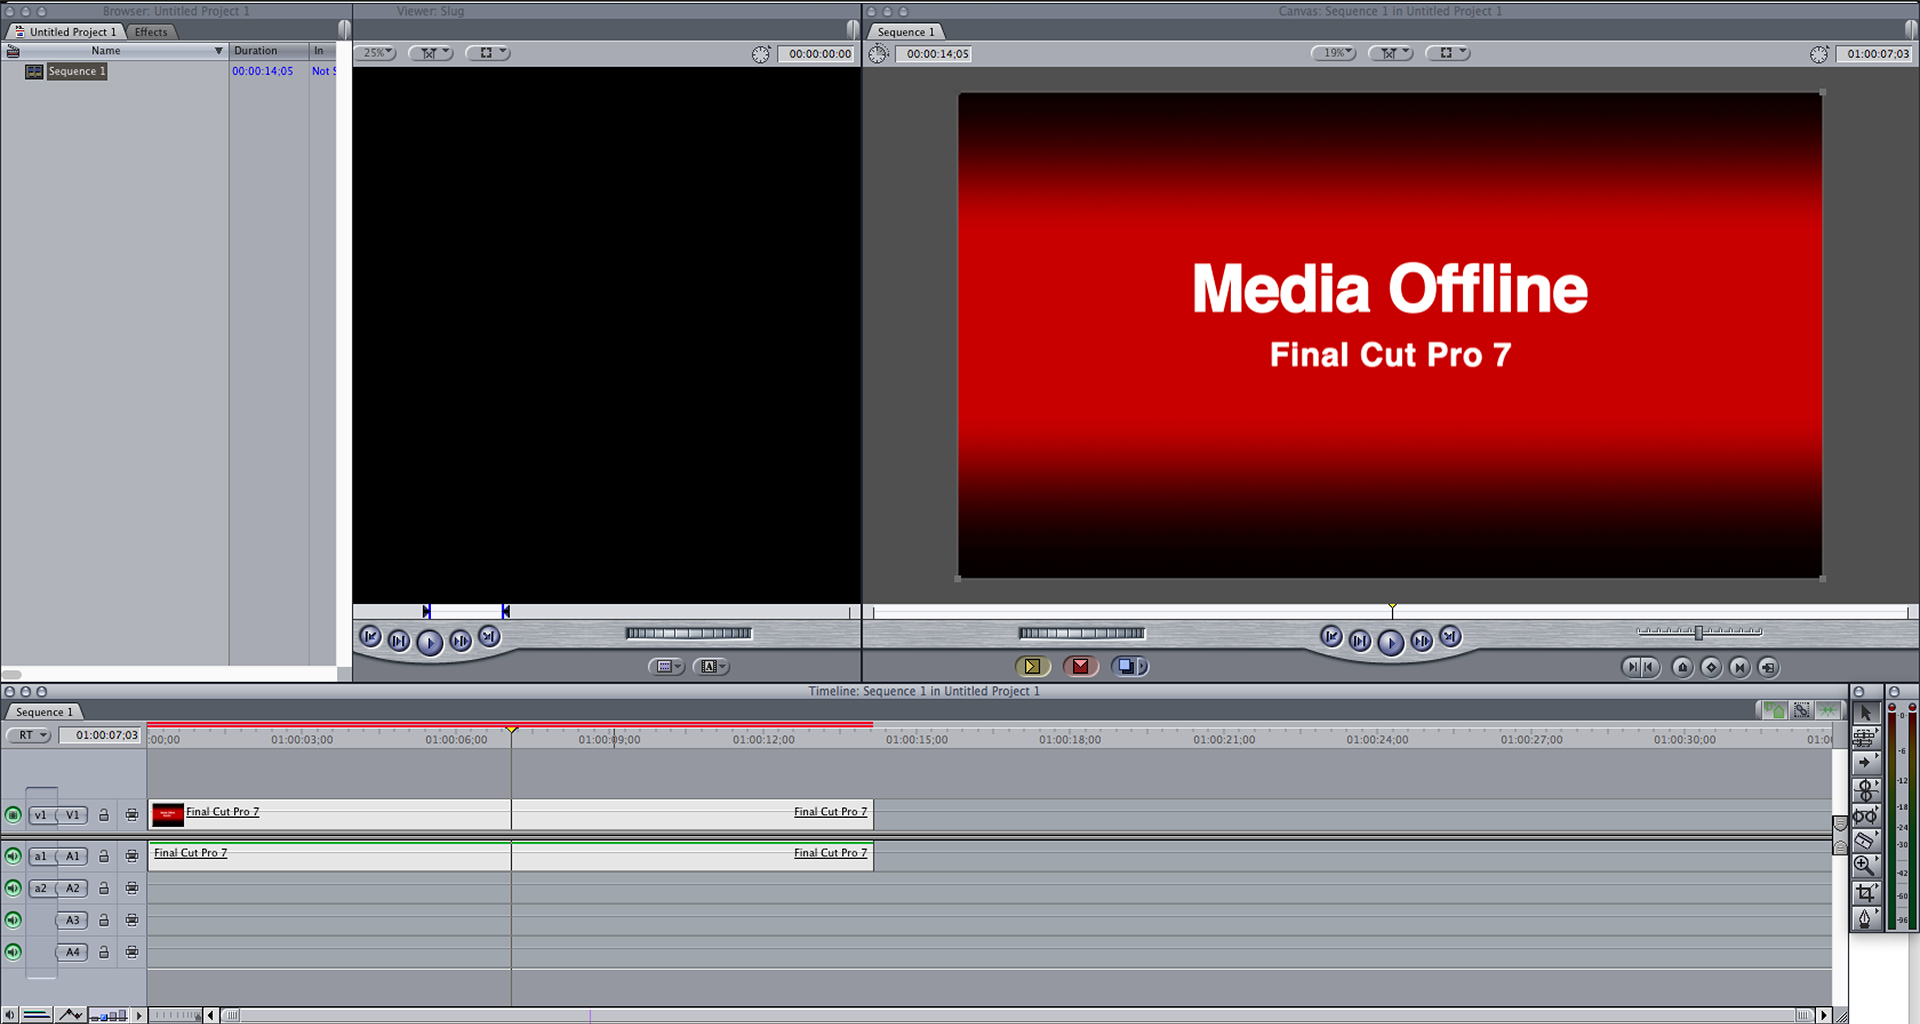 Migrating from final cut pro 7 to avid media composer 5. 5.